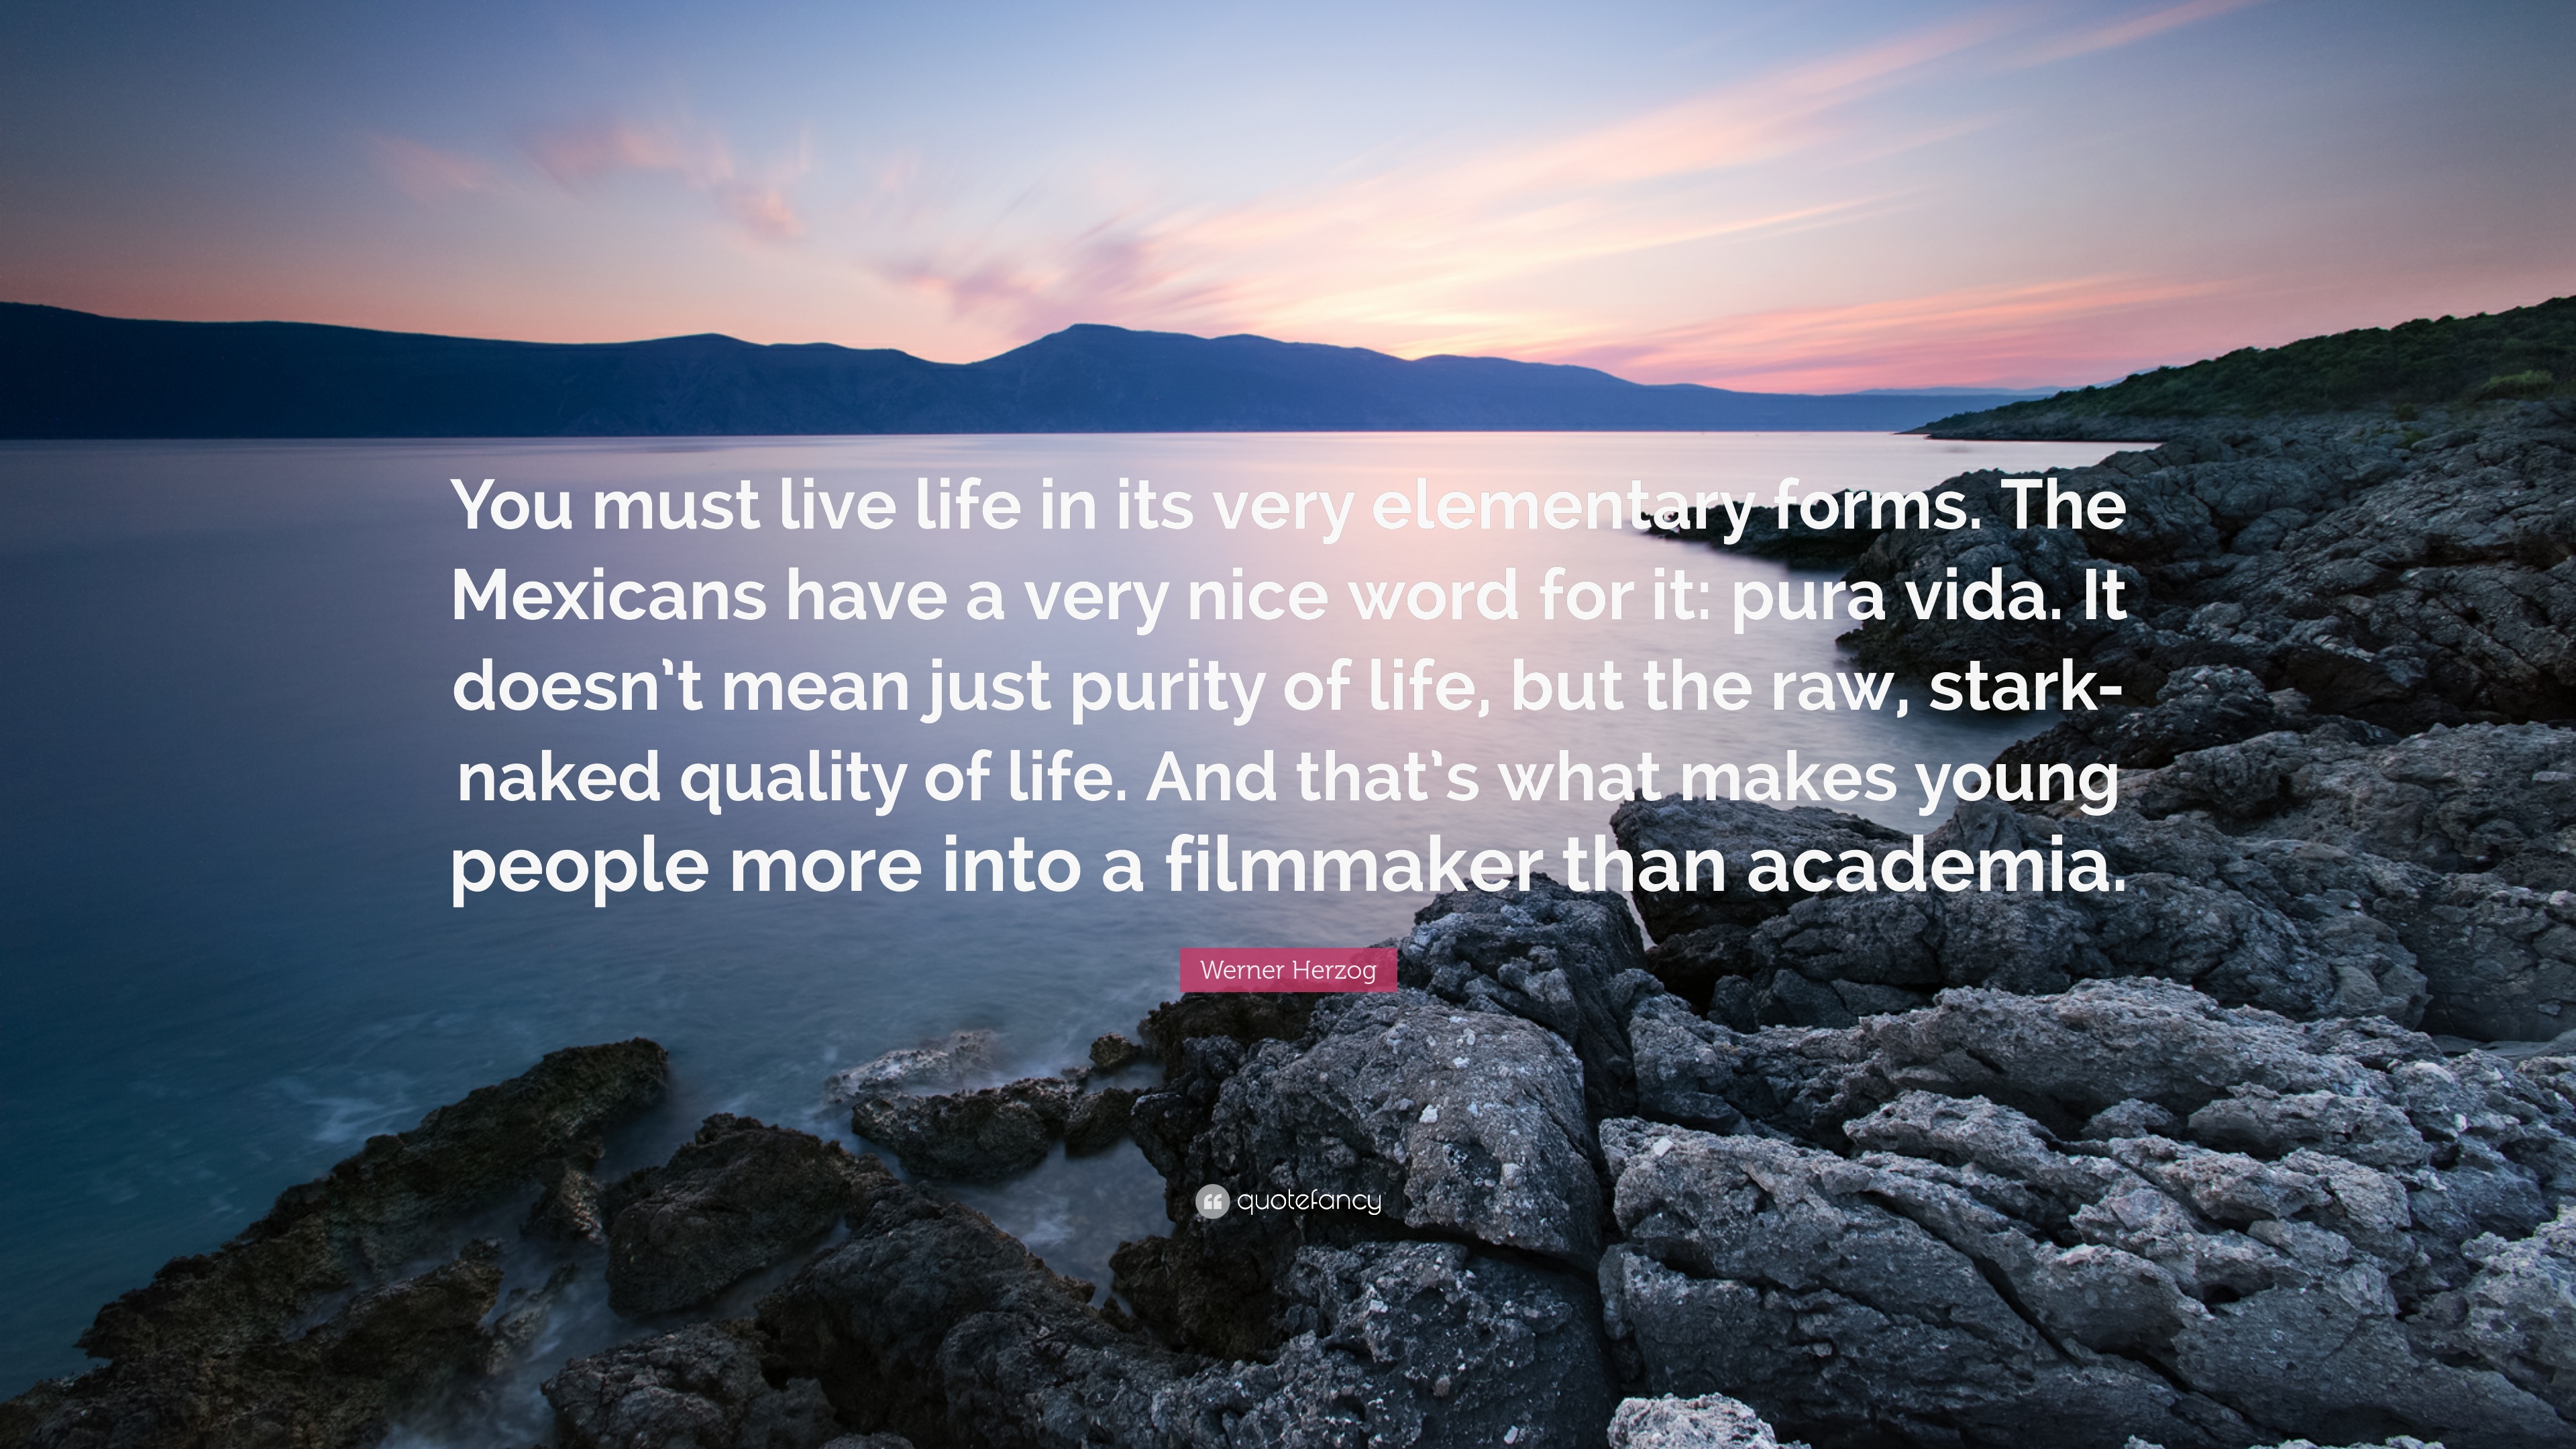 Werner Herzog Quote: “You must live life in its very elementary